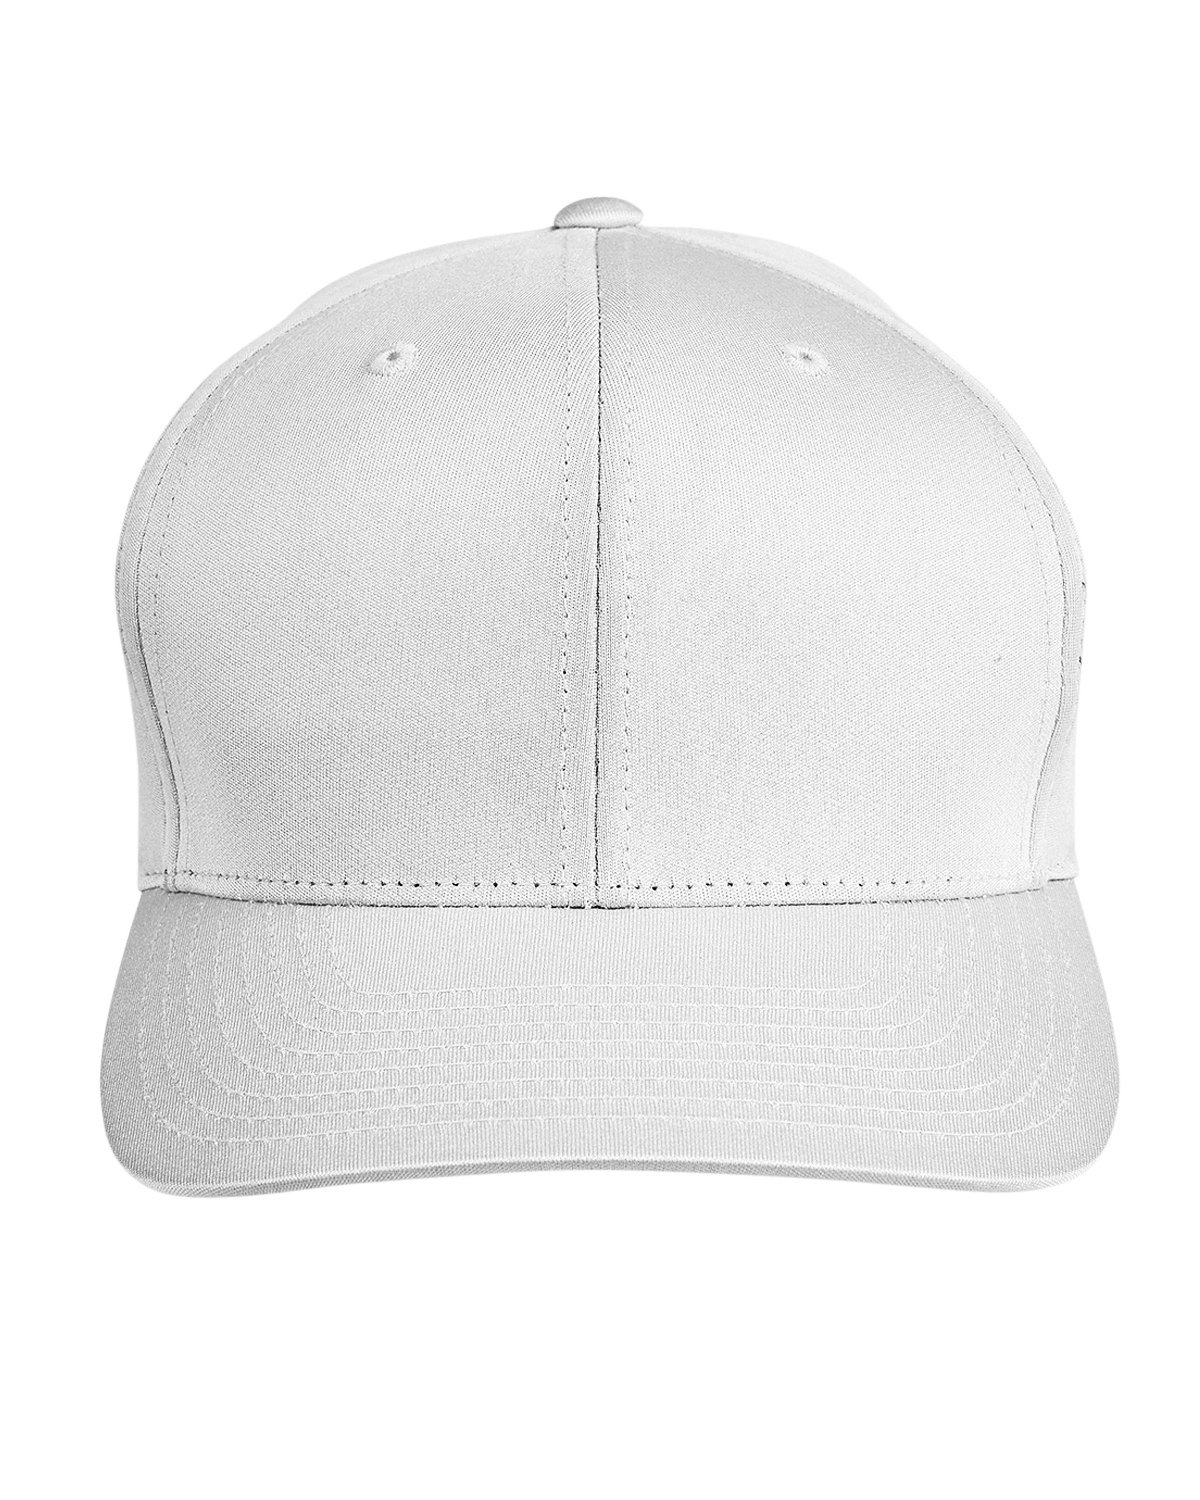 Team 365 by Yupoong® Adult Zone Performance Cap WHITE 